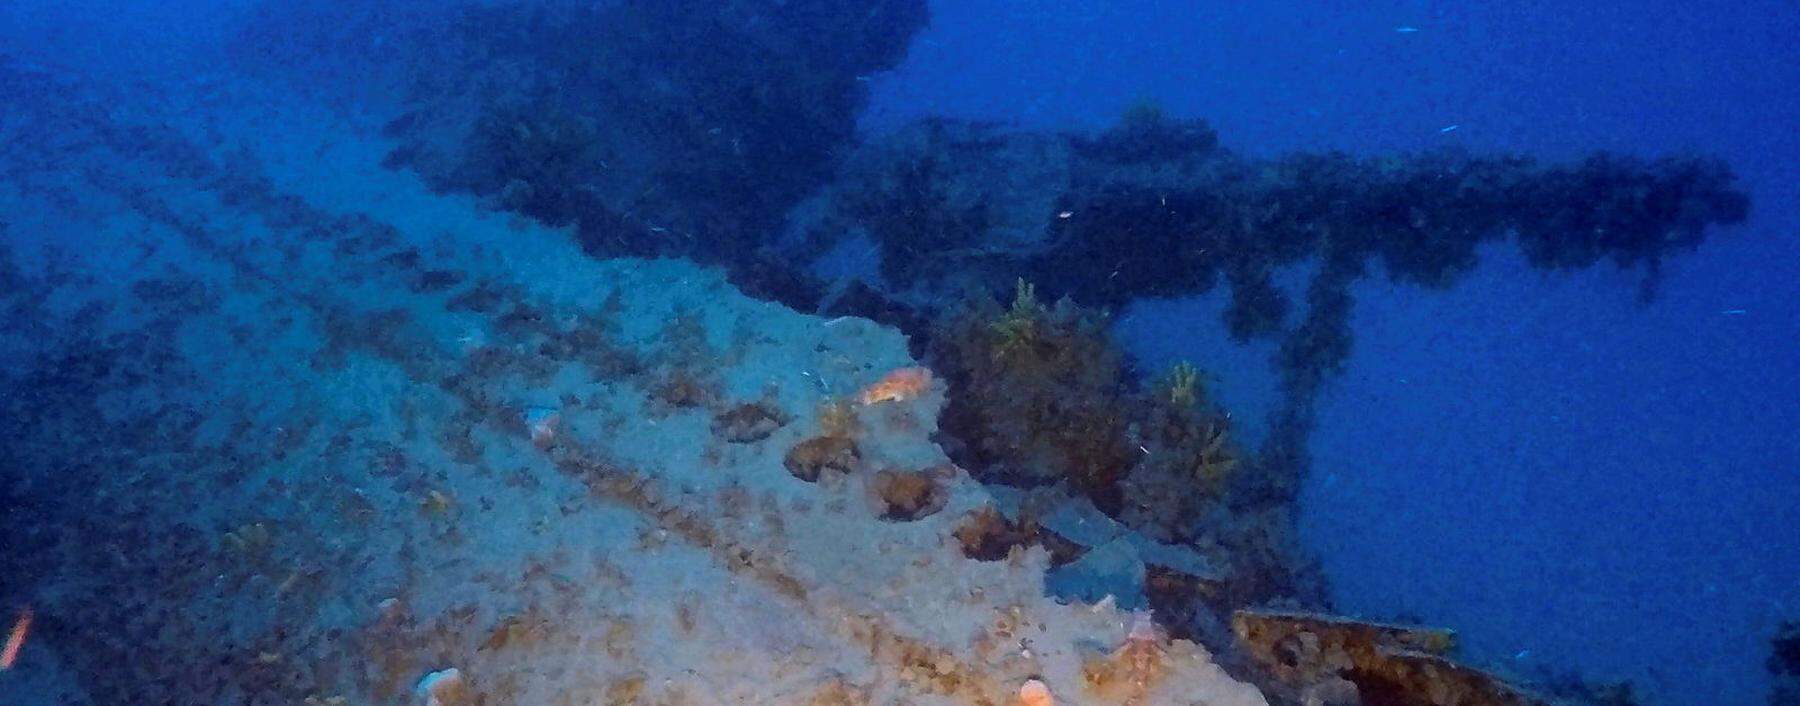 The wreckage of the Italian submarine Jantina that was sunk during World War II by the British submarine HMS Torbay, lays south of the island of Mykonos, in the Aegean Sea